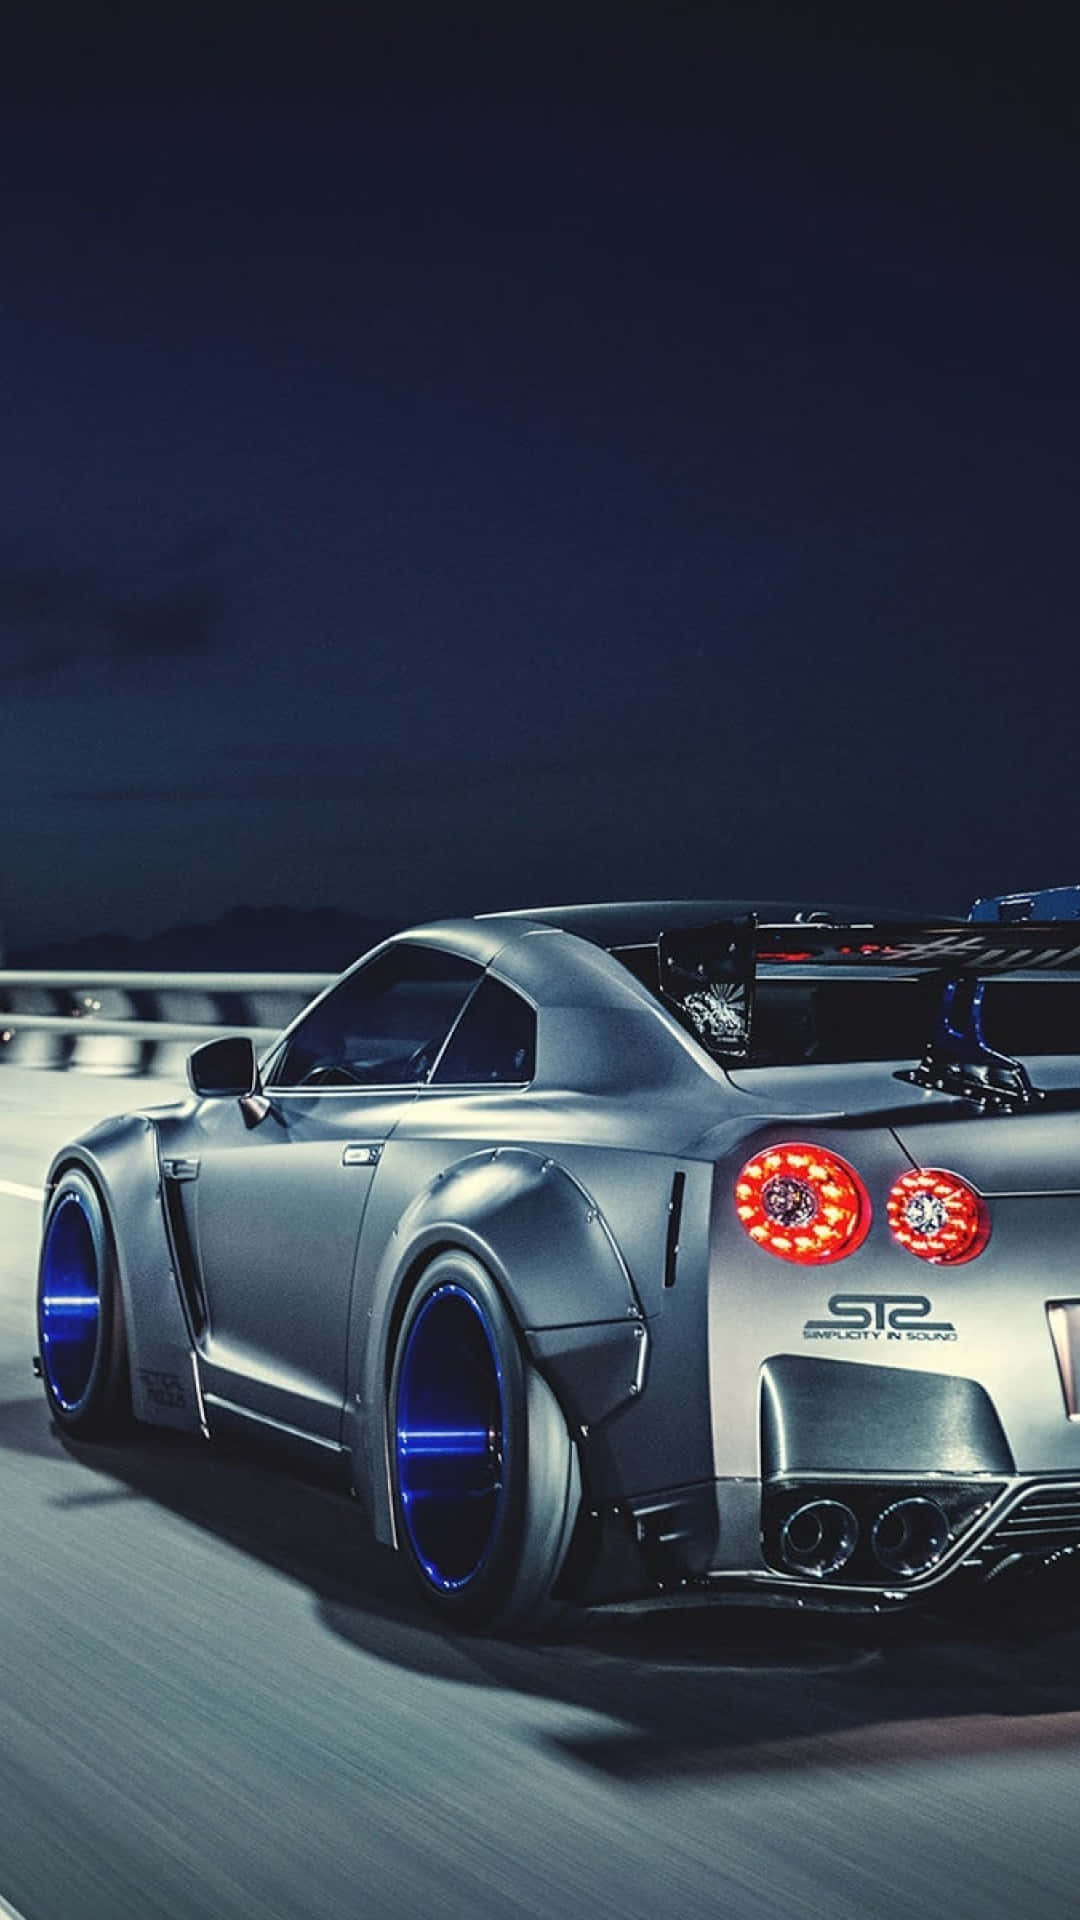 Explore the World in Style with a GTR Iphone Wallpaper